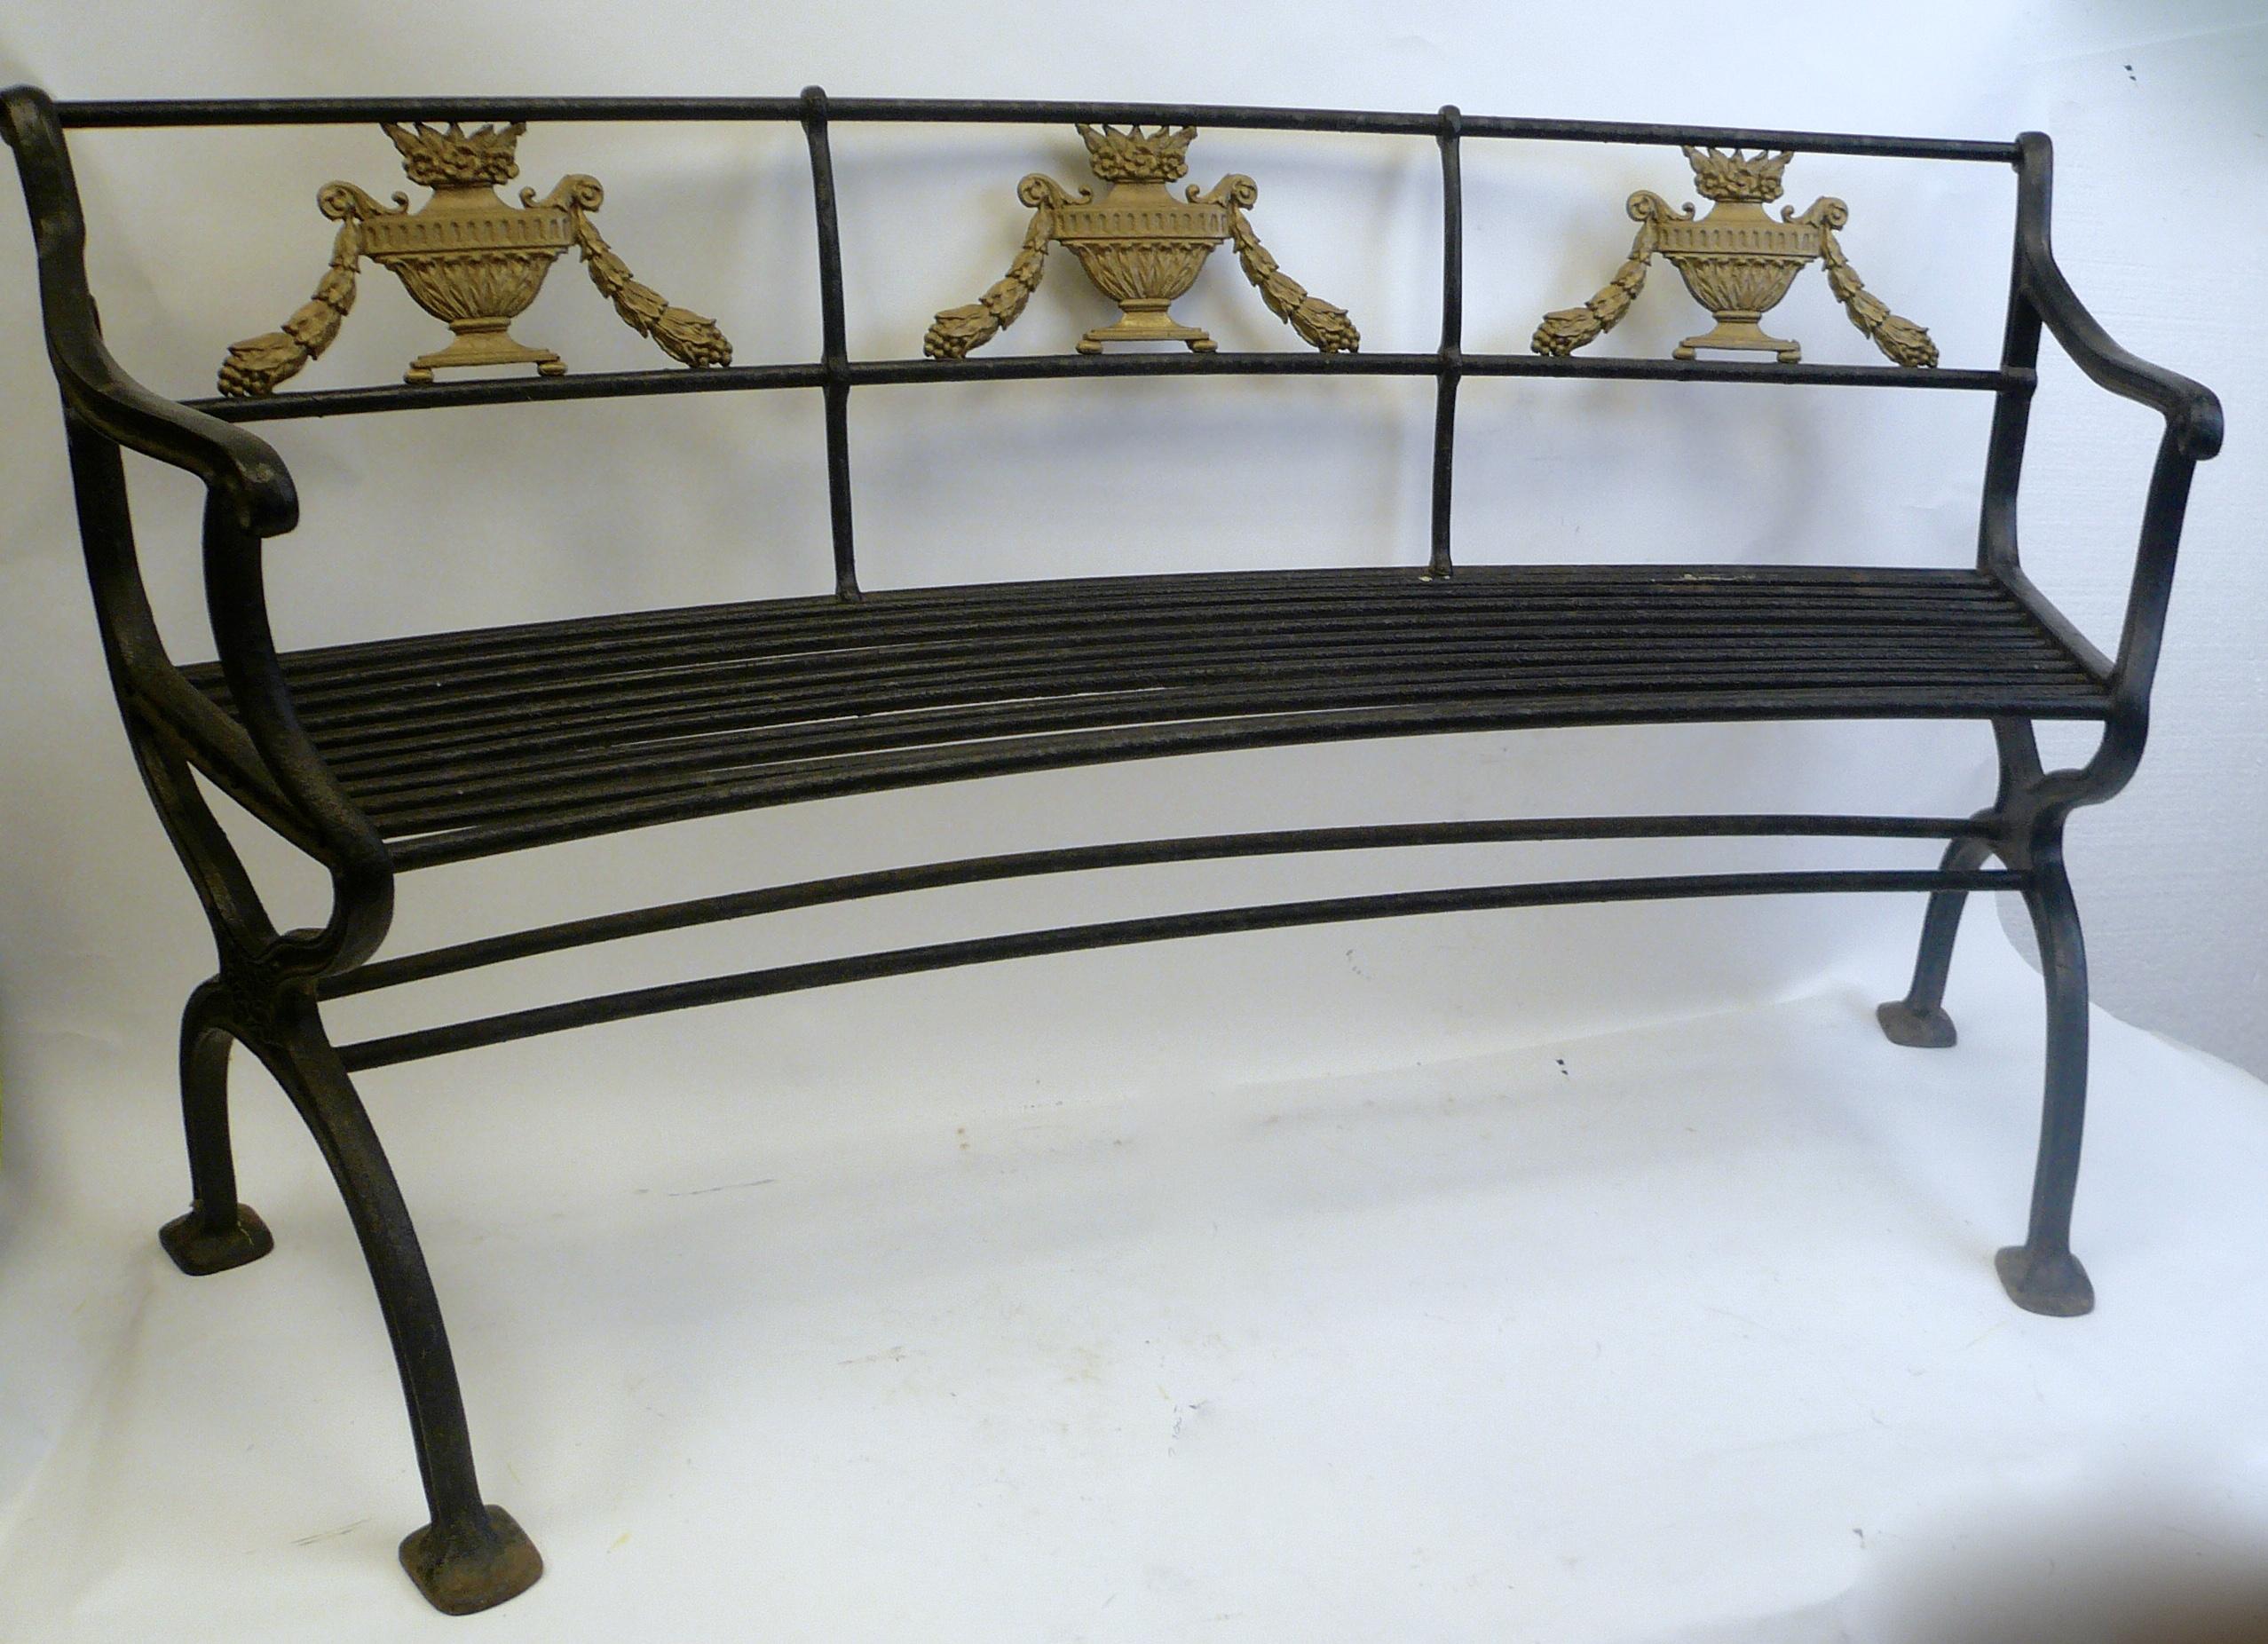 Pair of Classical Style Cast Iron Garden Benches by W. A. Snow, Boston 2